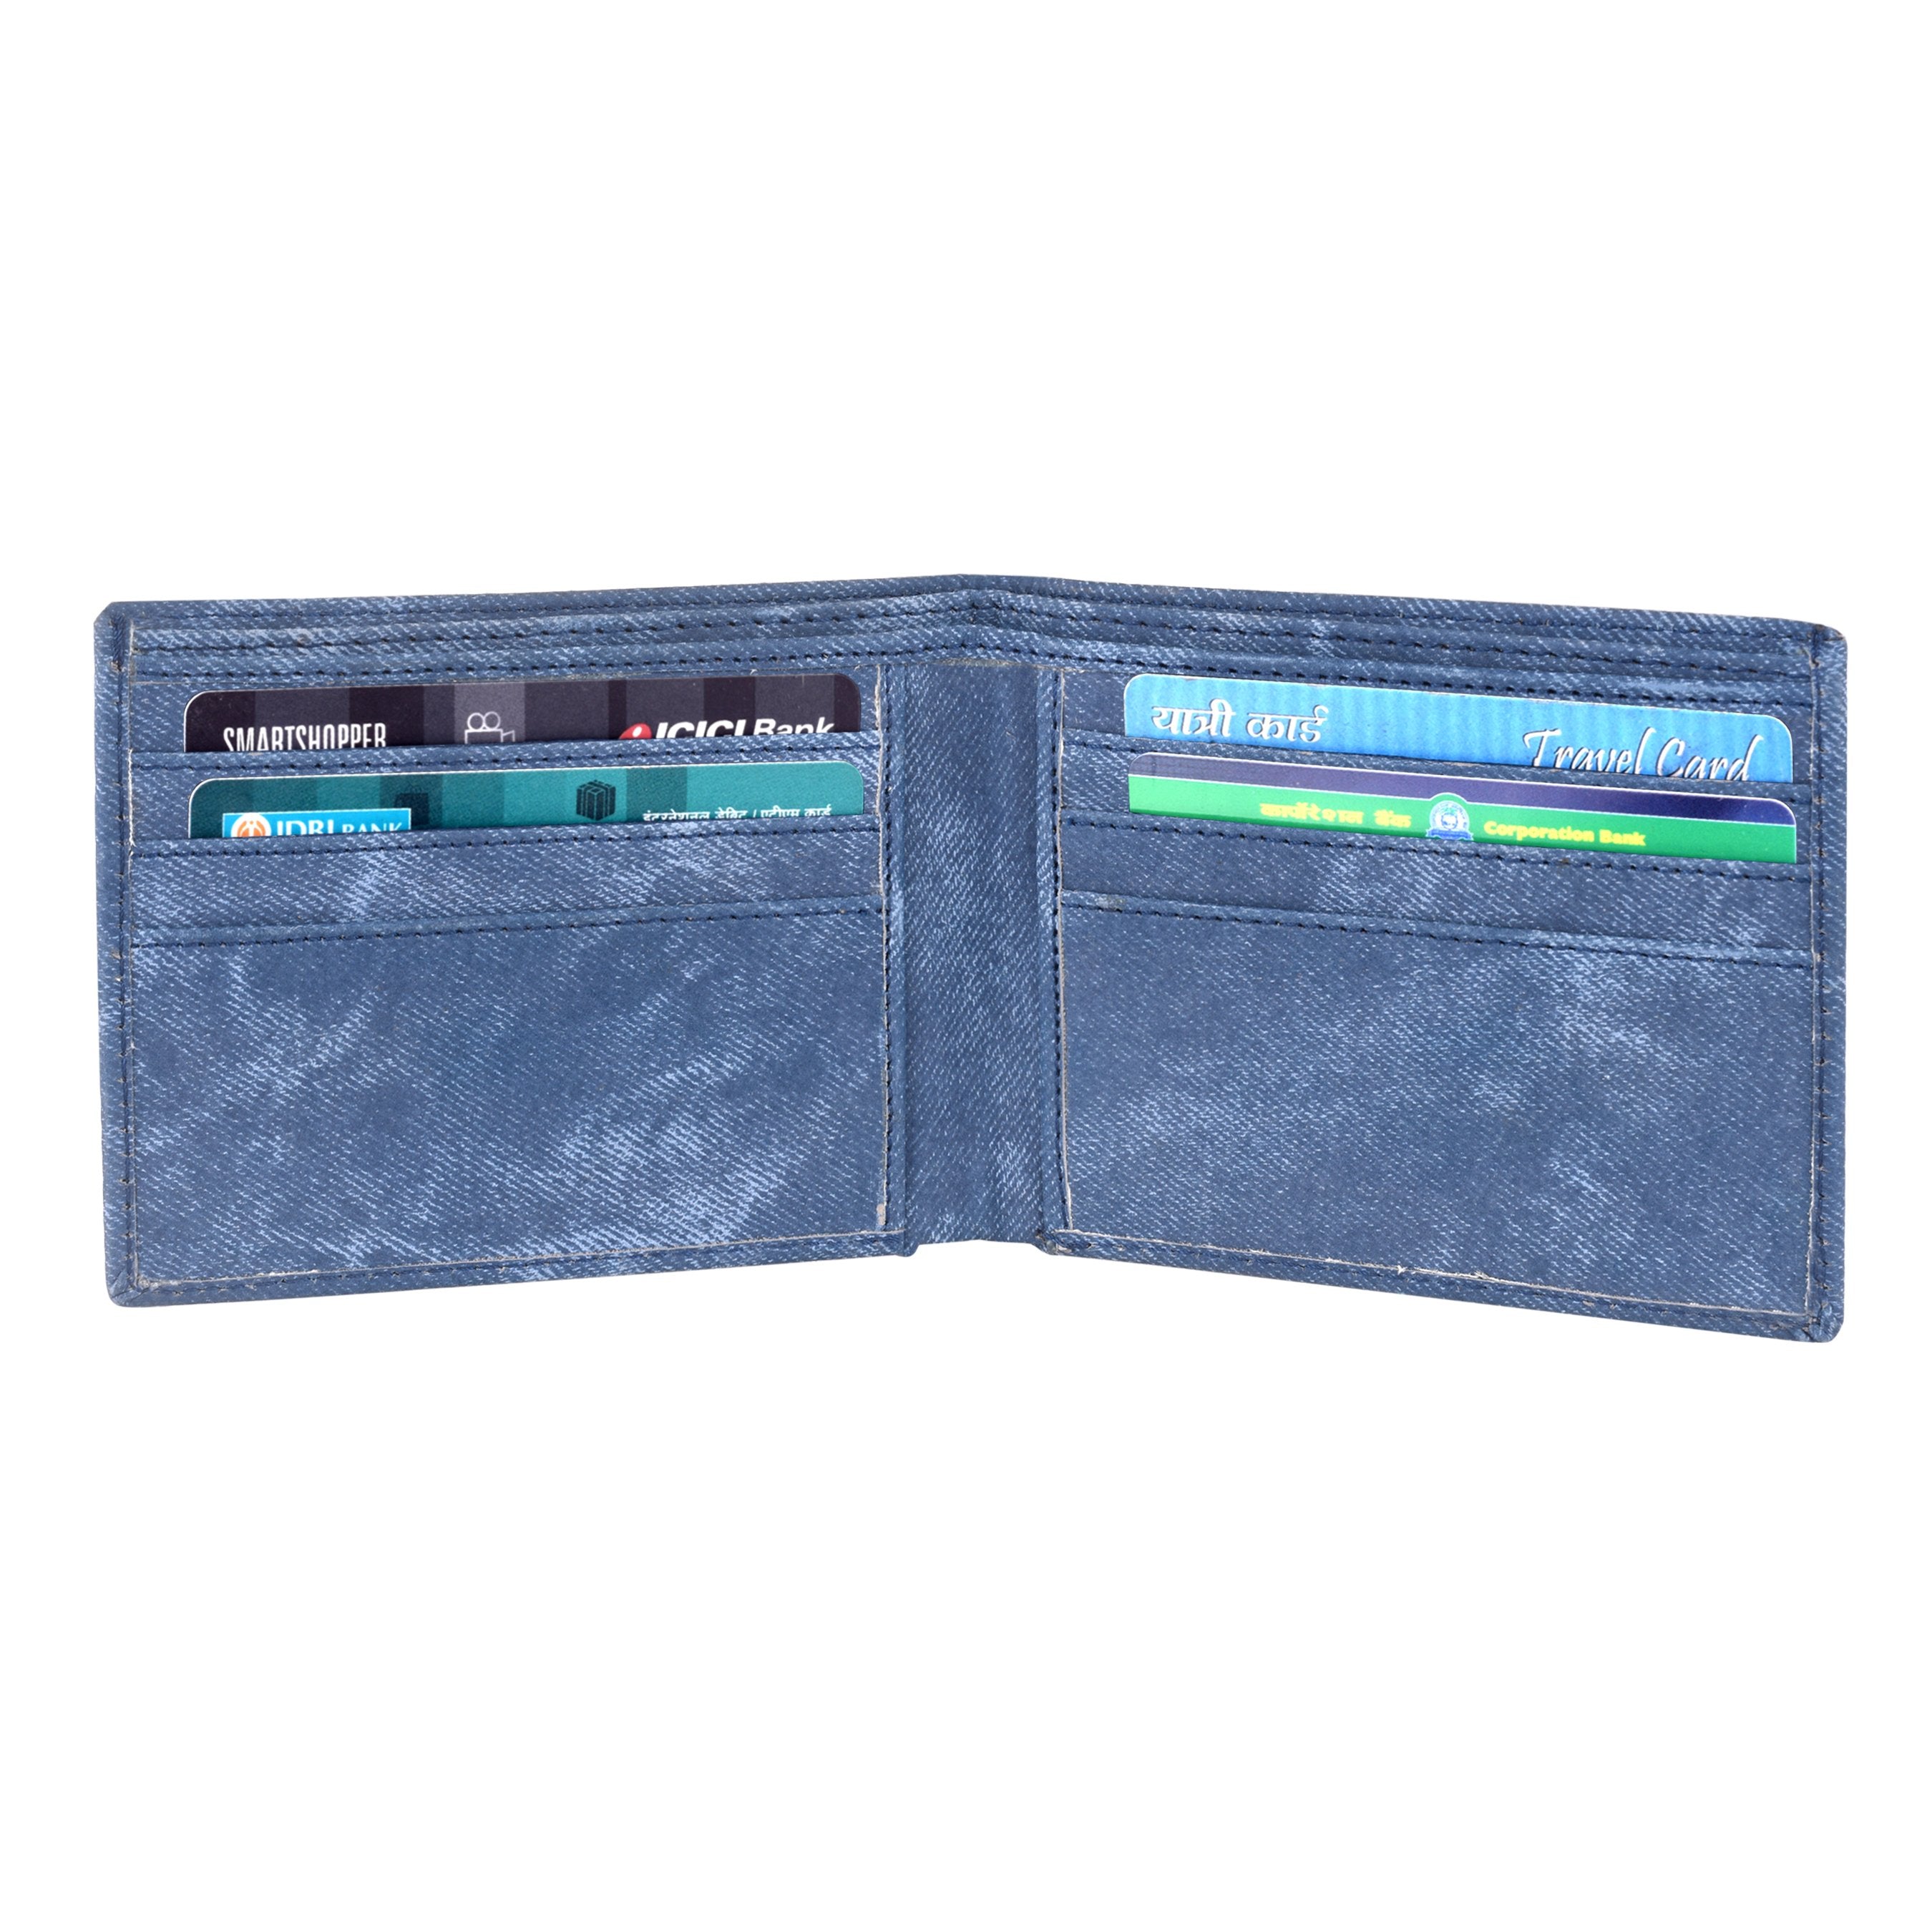 Lorenz Blue Denim Wallet open, displaying compartments for cards and cash.